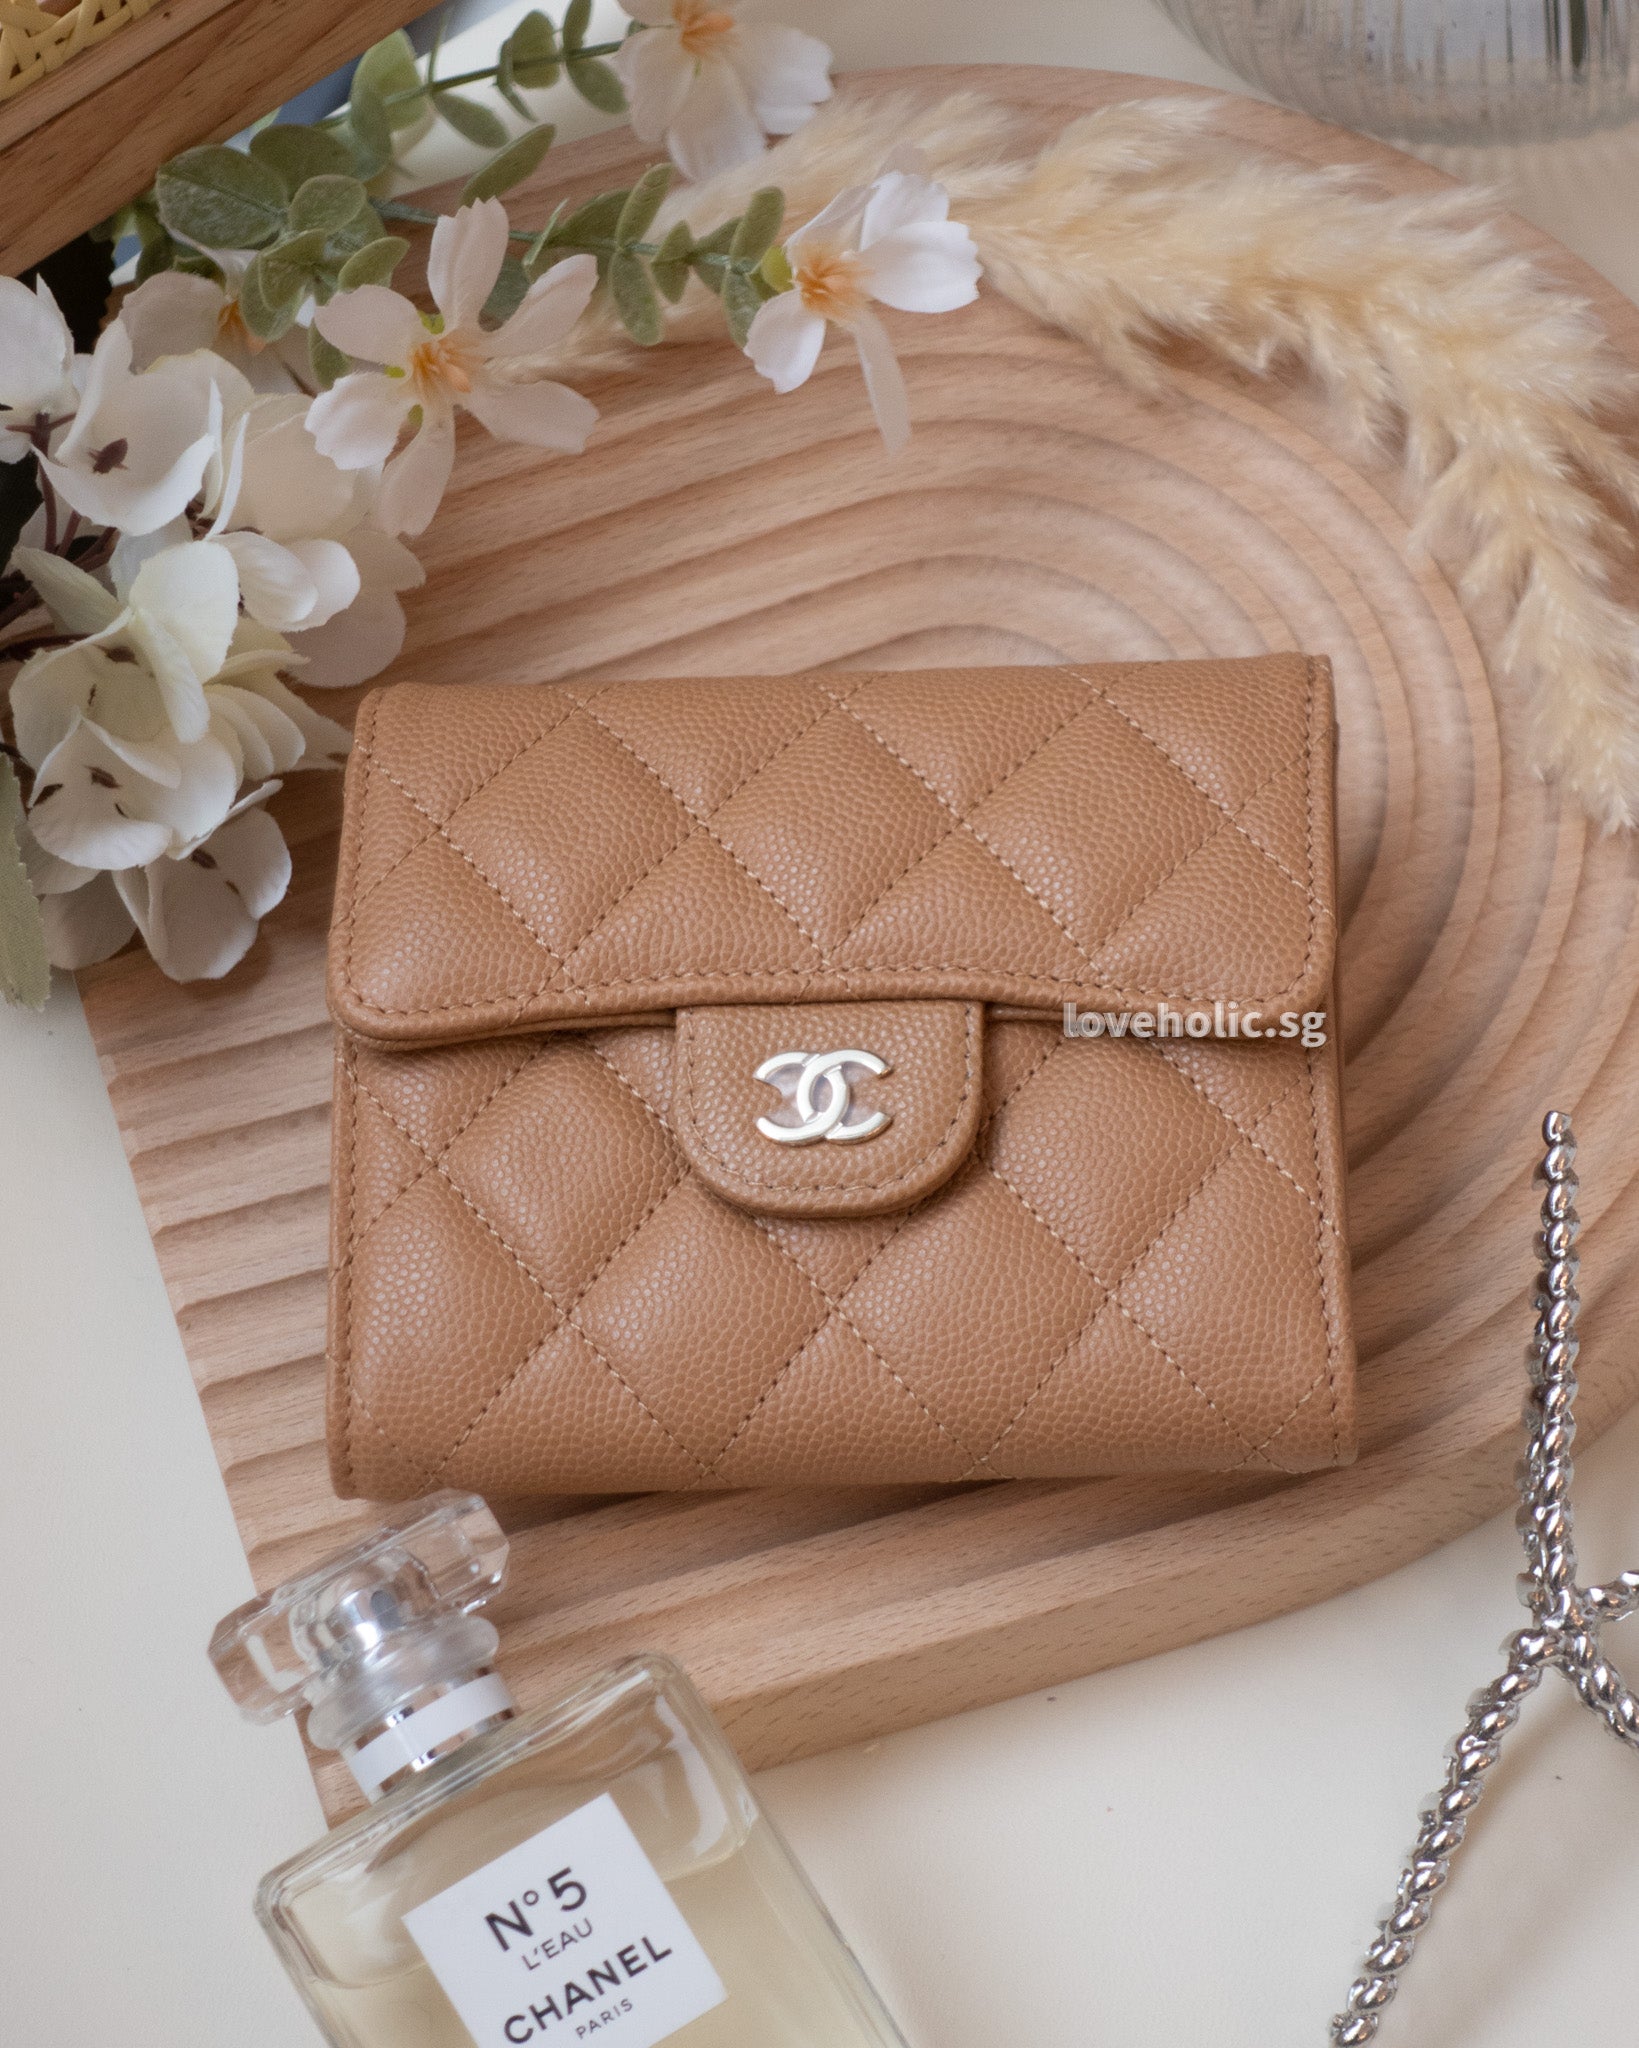 classic CHANEL card case holder - more than just a small leather